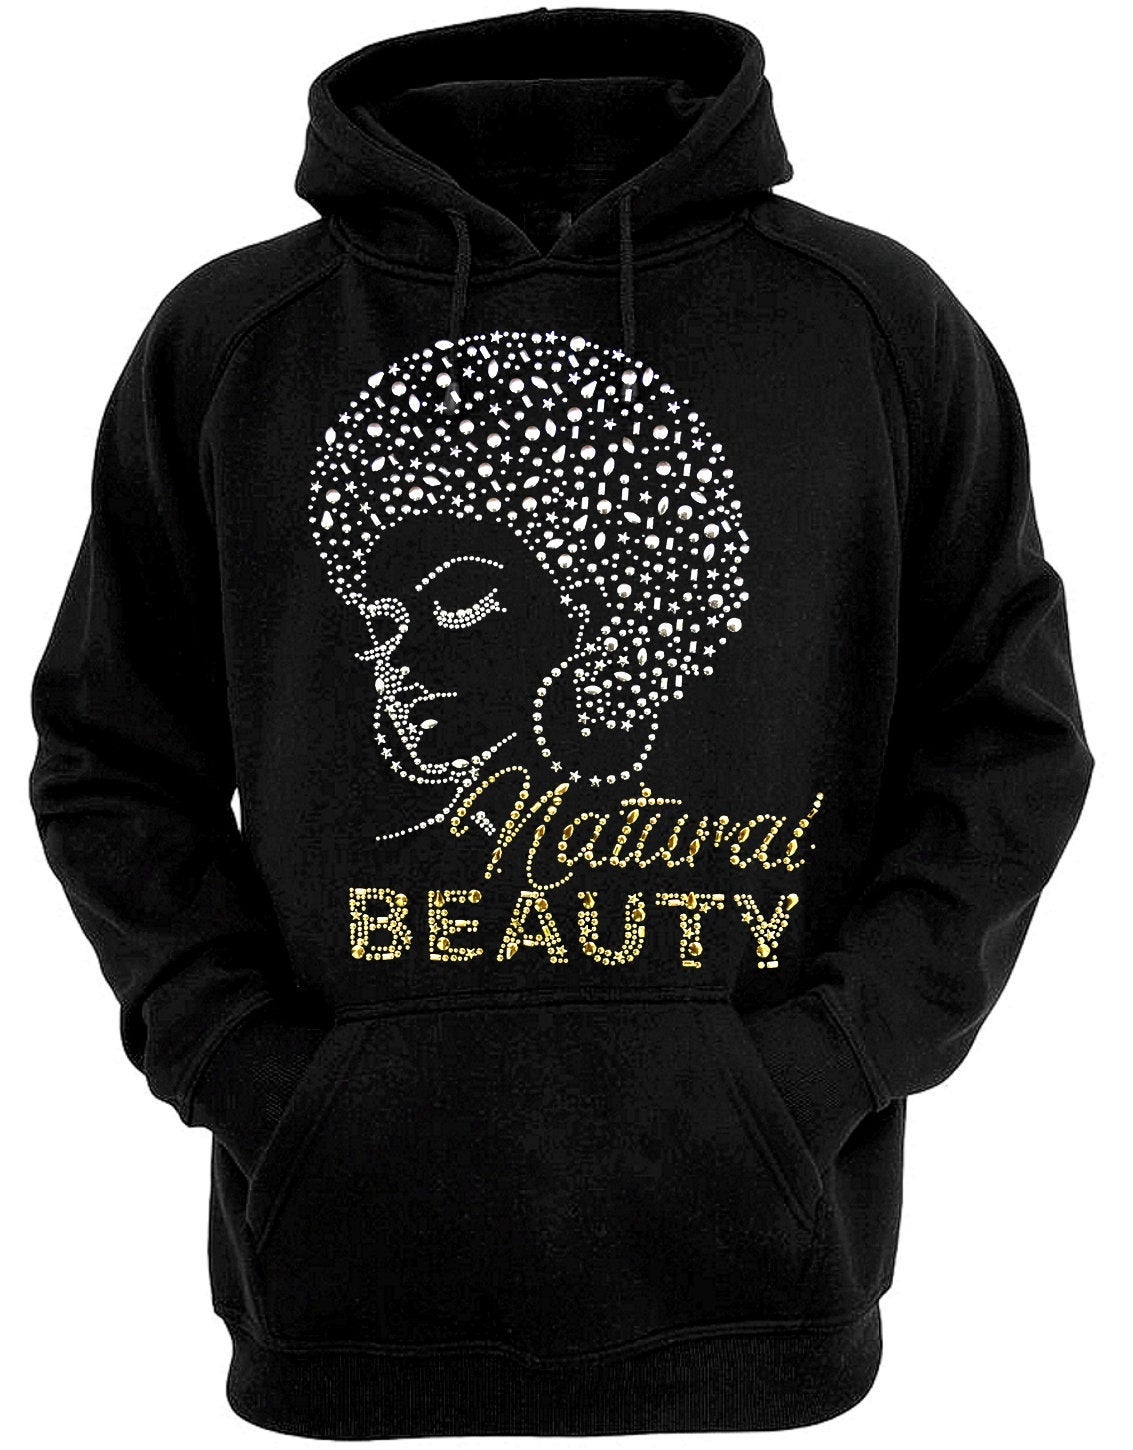 Forget Ugly Christmas Sweaters, Try These Sweatshirts That Celebrate Black Beauty